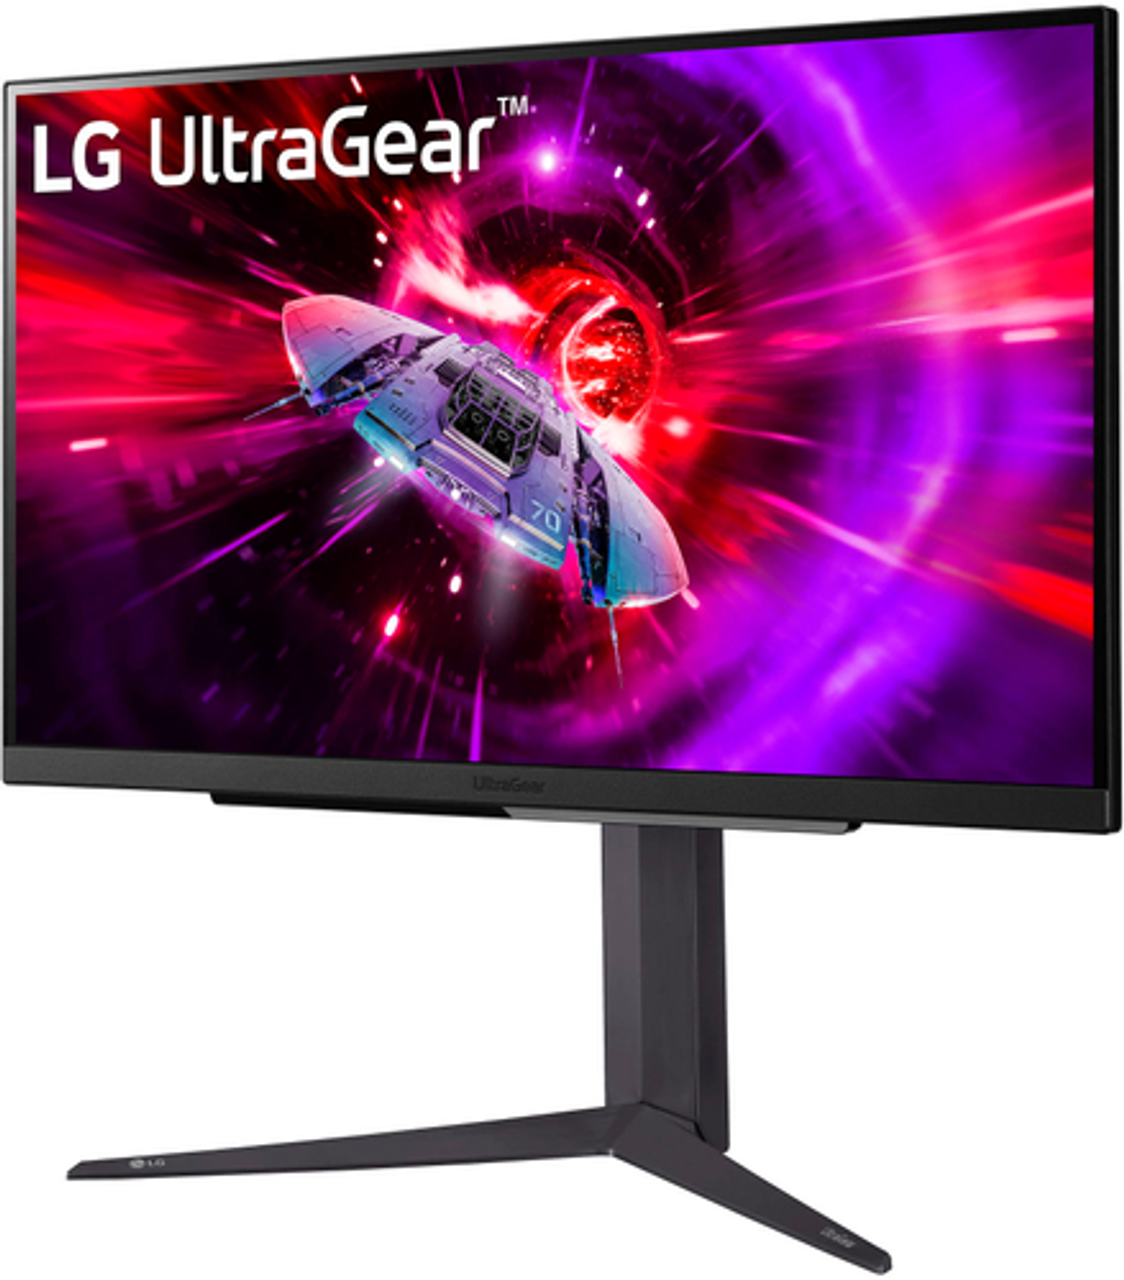 LG - UltraGear 27" IPS QHD FreeSync and G-SYNC Compatible Monitor with HDR (Display Port, HDMI) - Black